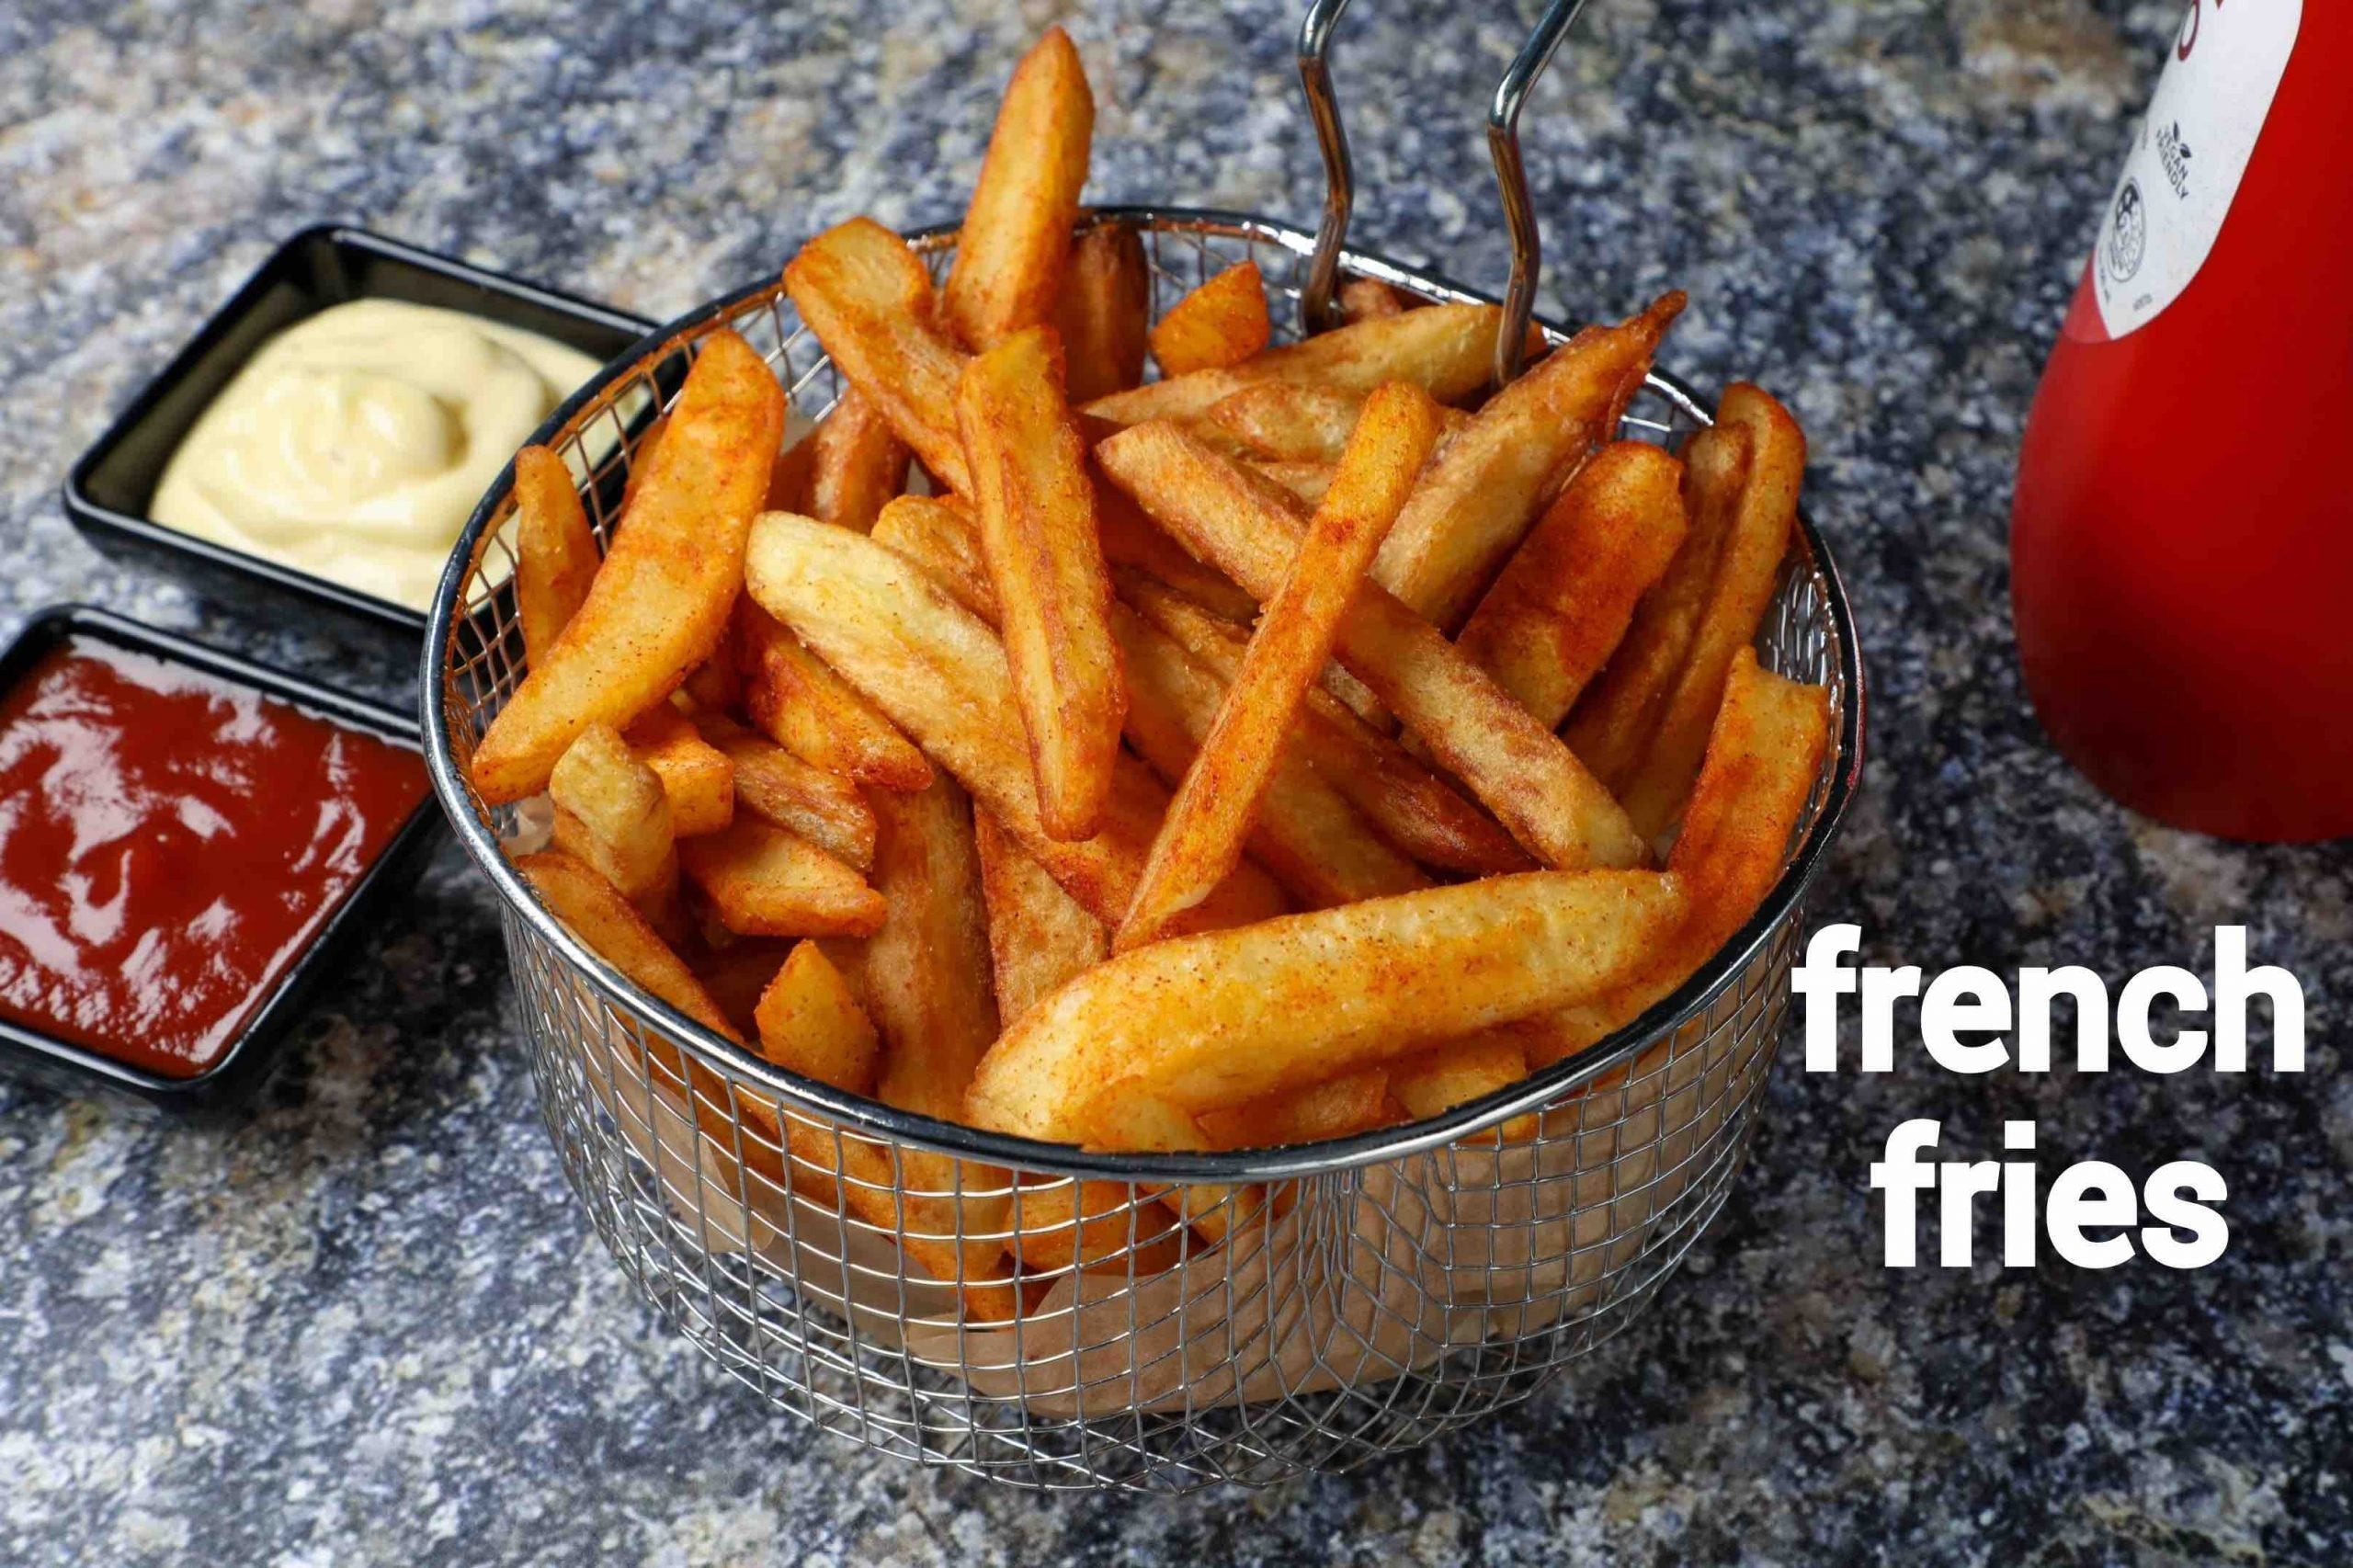 french fries recipe  finger chips  how to make homemade french fries